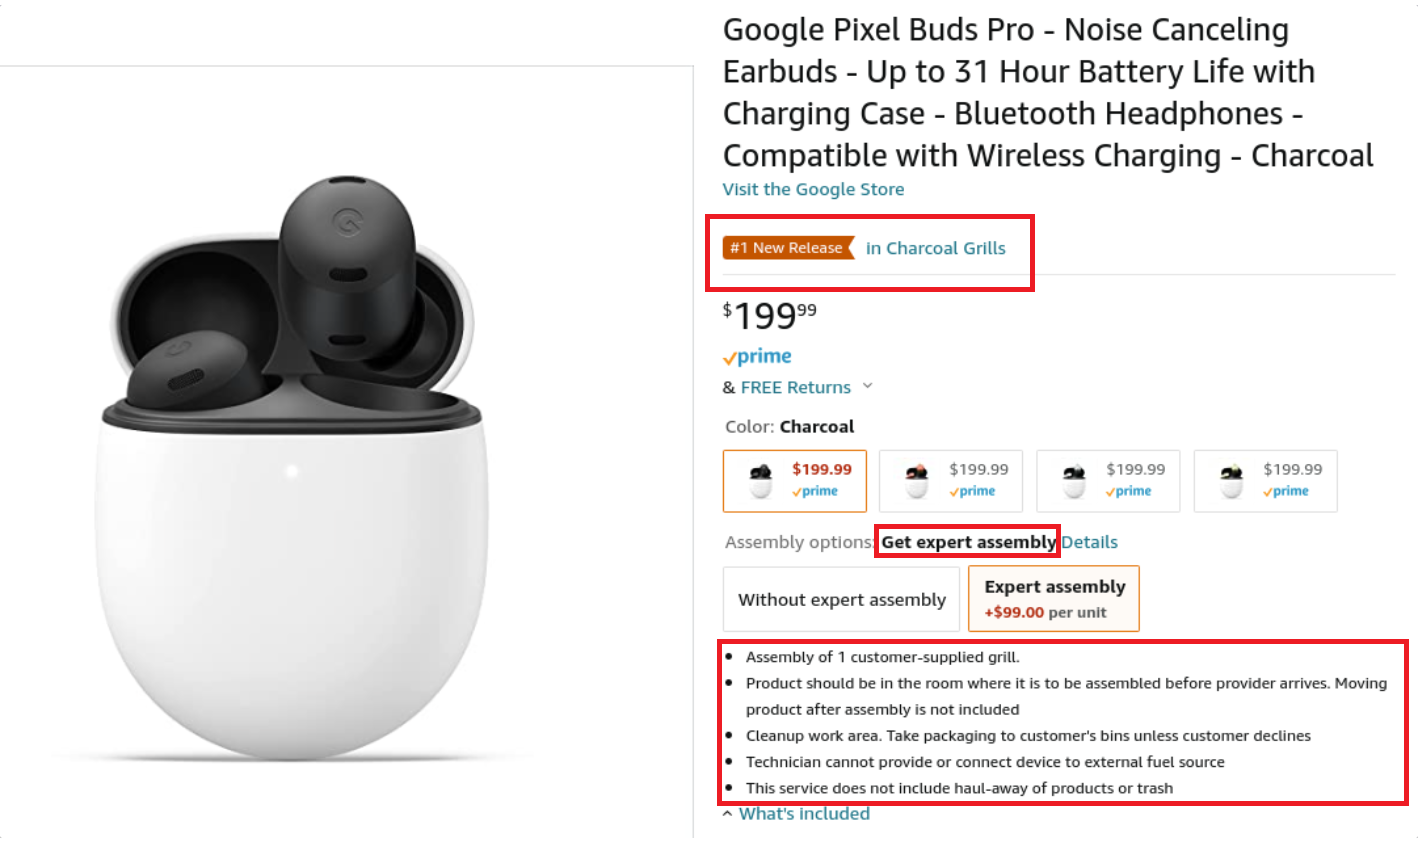 Amazon's top new charcoal grill is the Pixel Buds Pro; wait, what